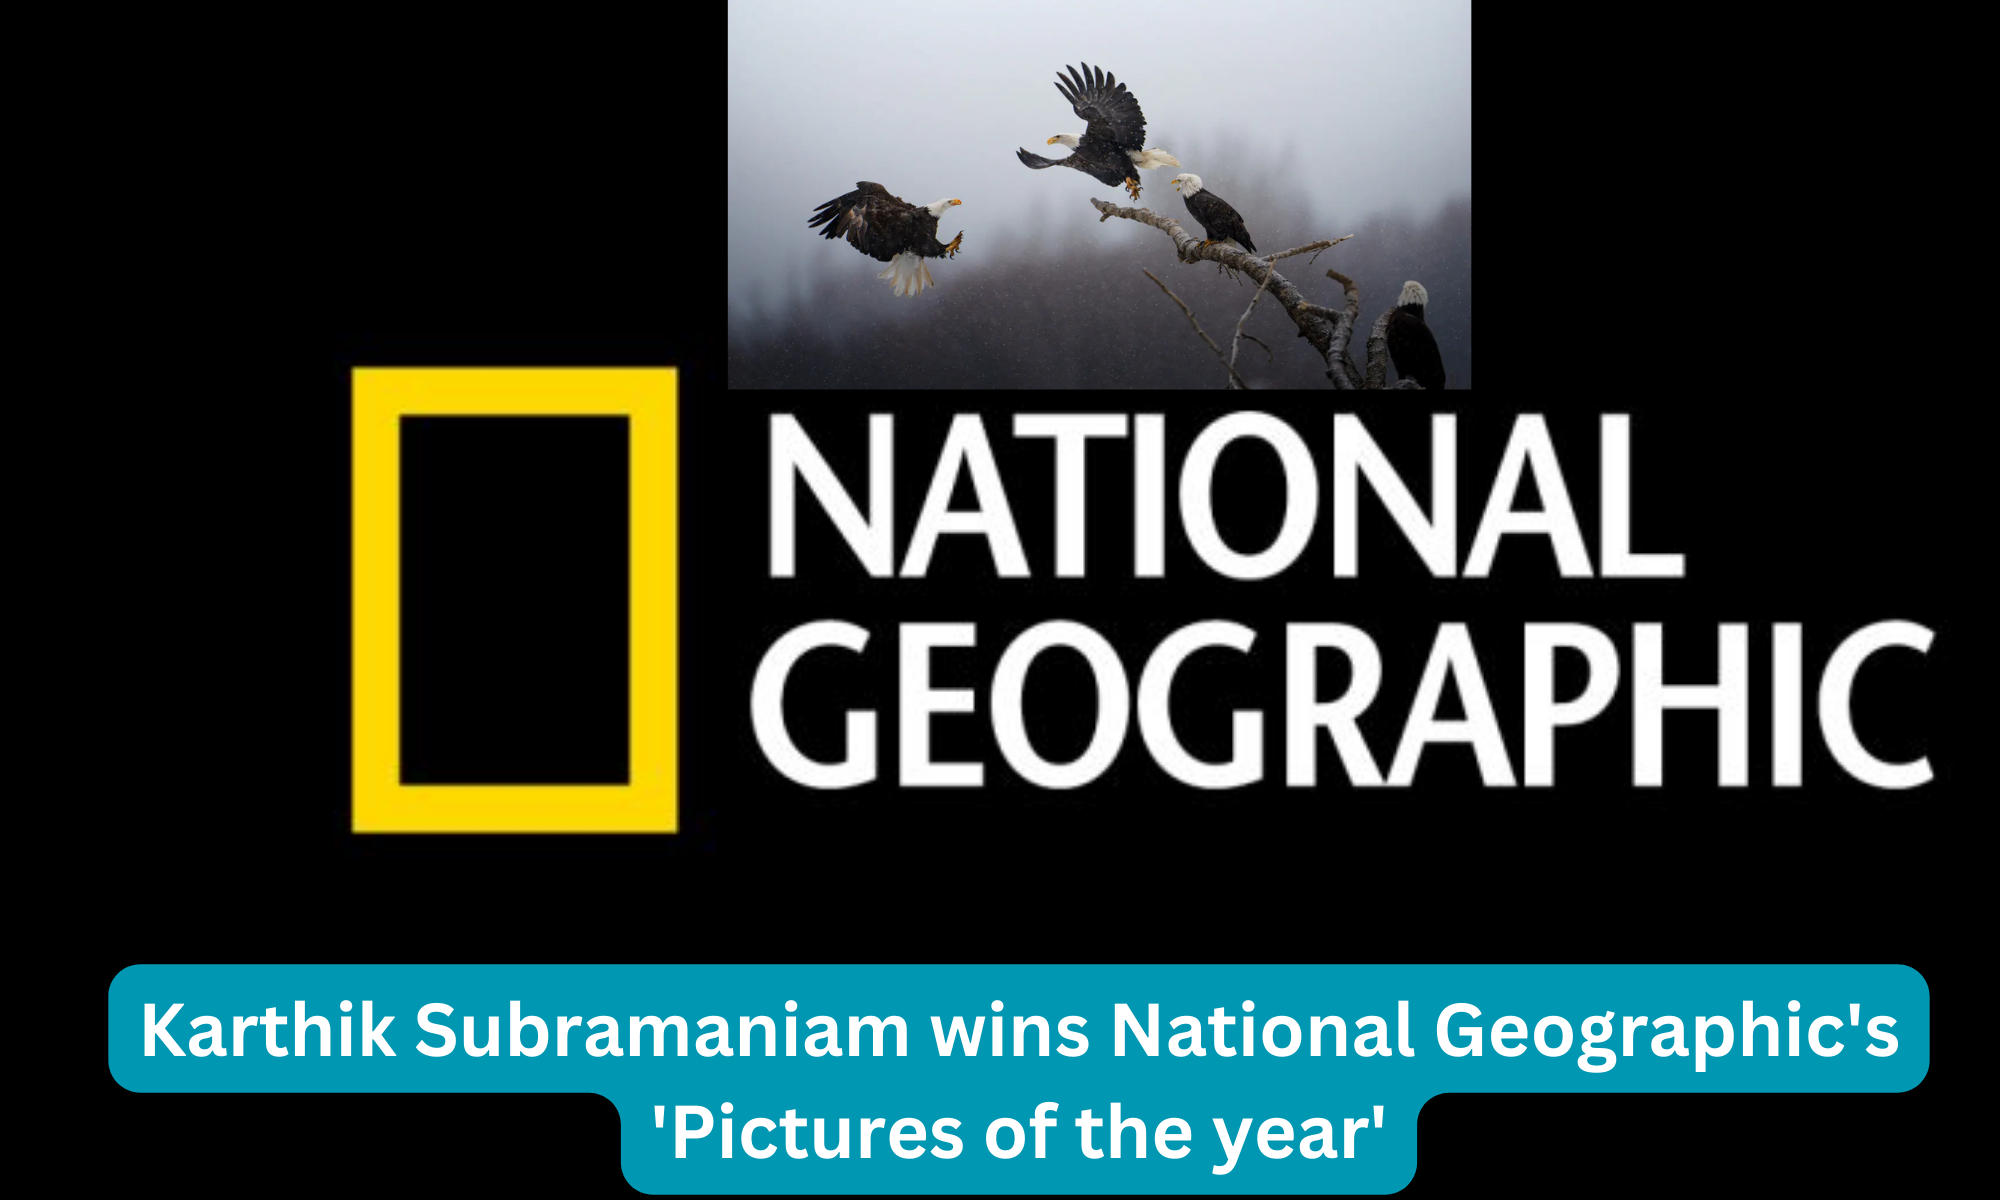 Karthik Subramaniam wins National Geographic's 'pictures of the year'